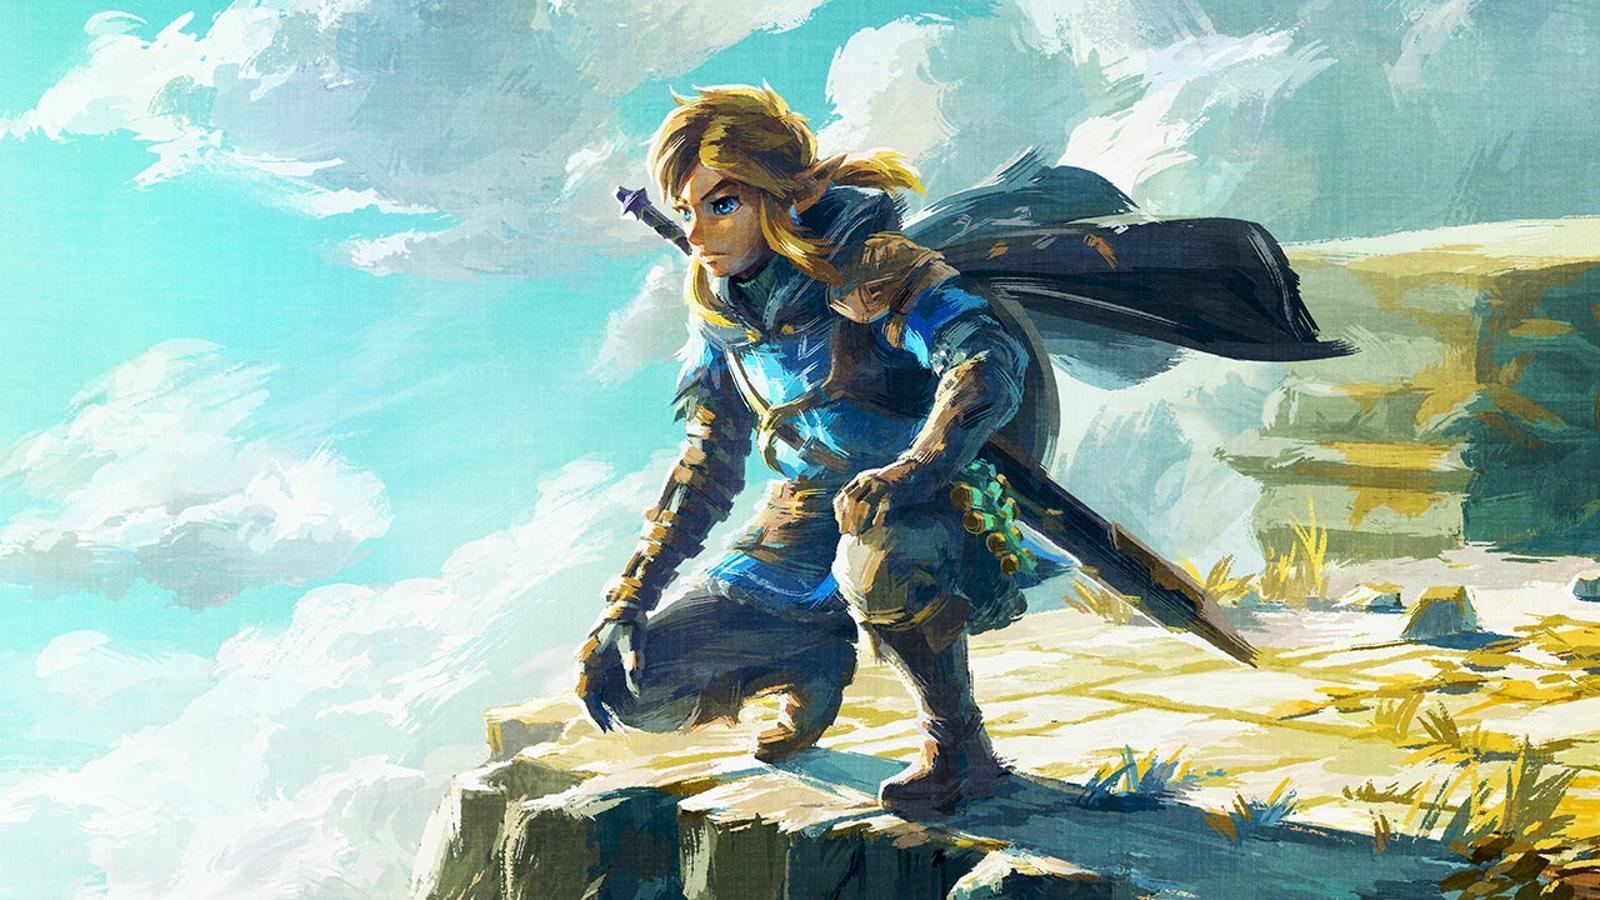 Key art for The Legend of Zelda: Tears of the Kingdom featuring protagonist Link.